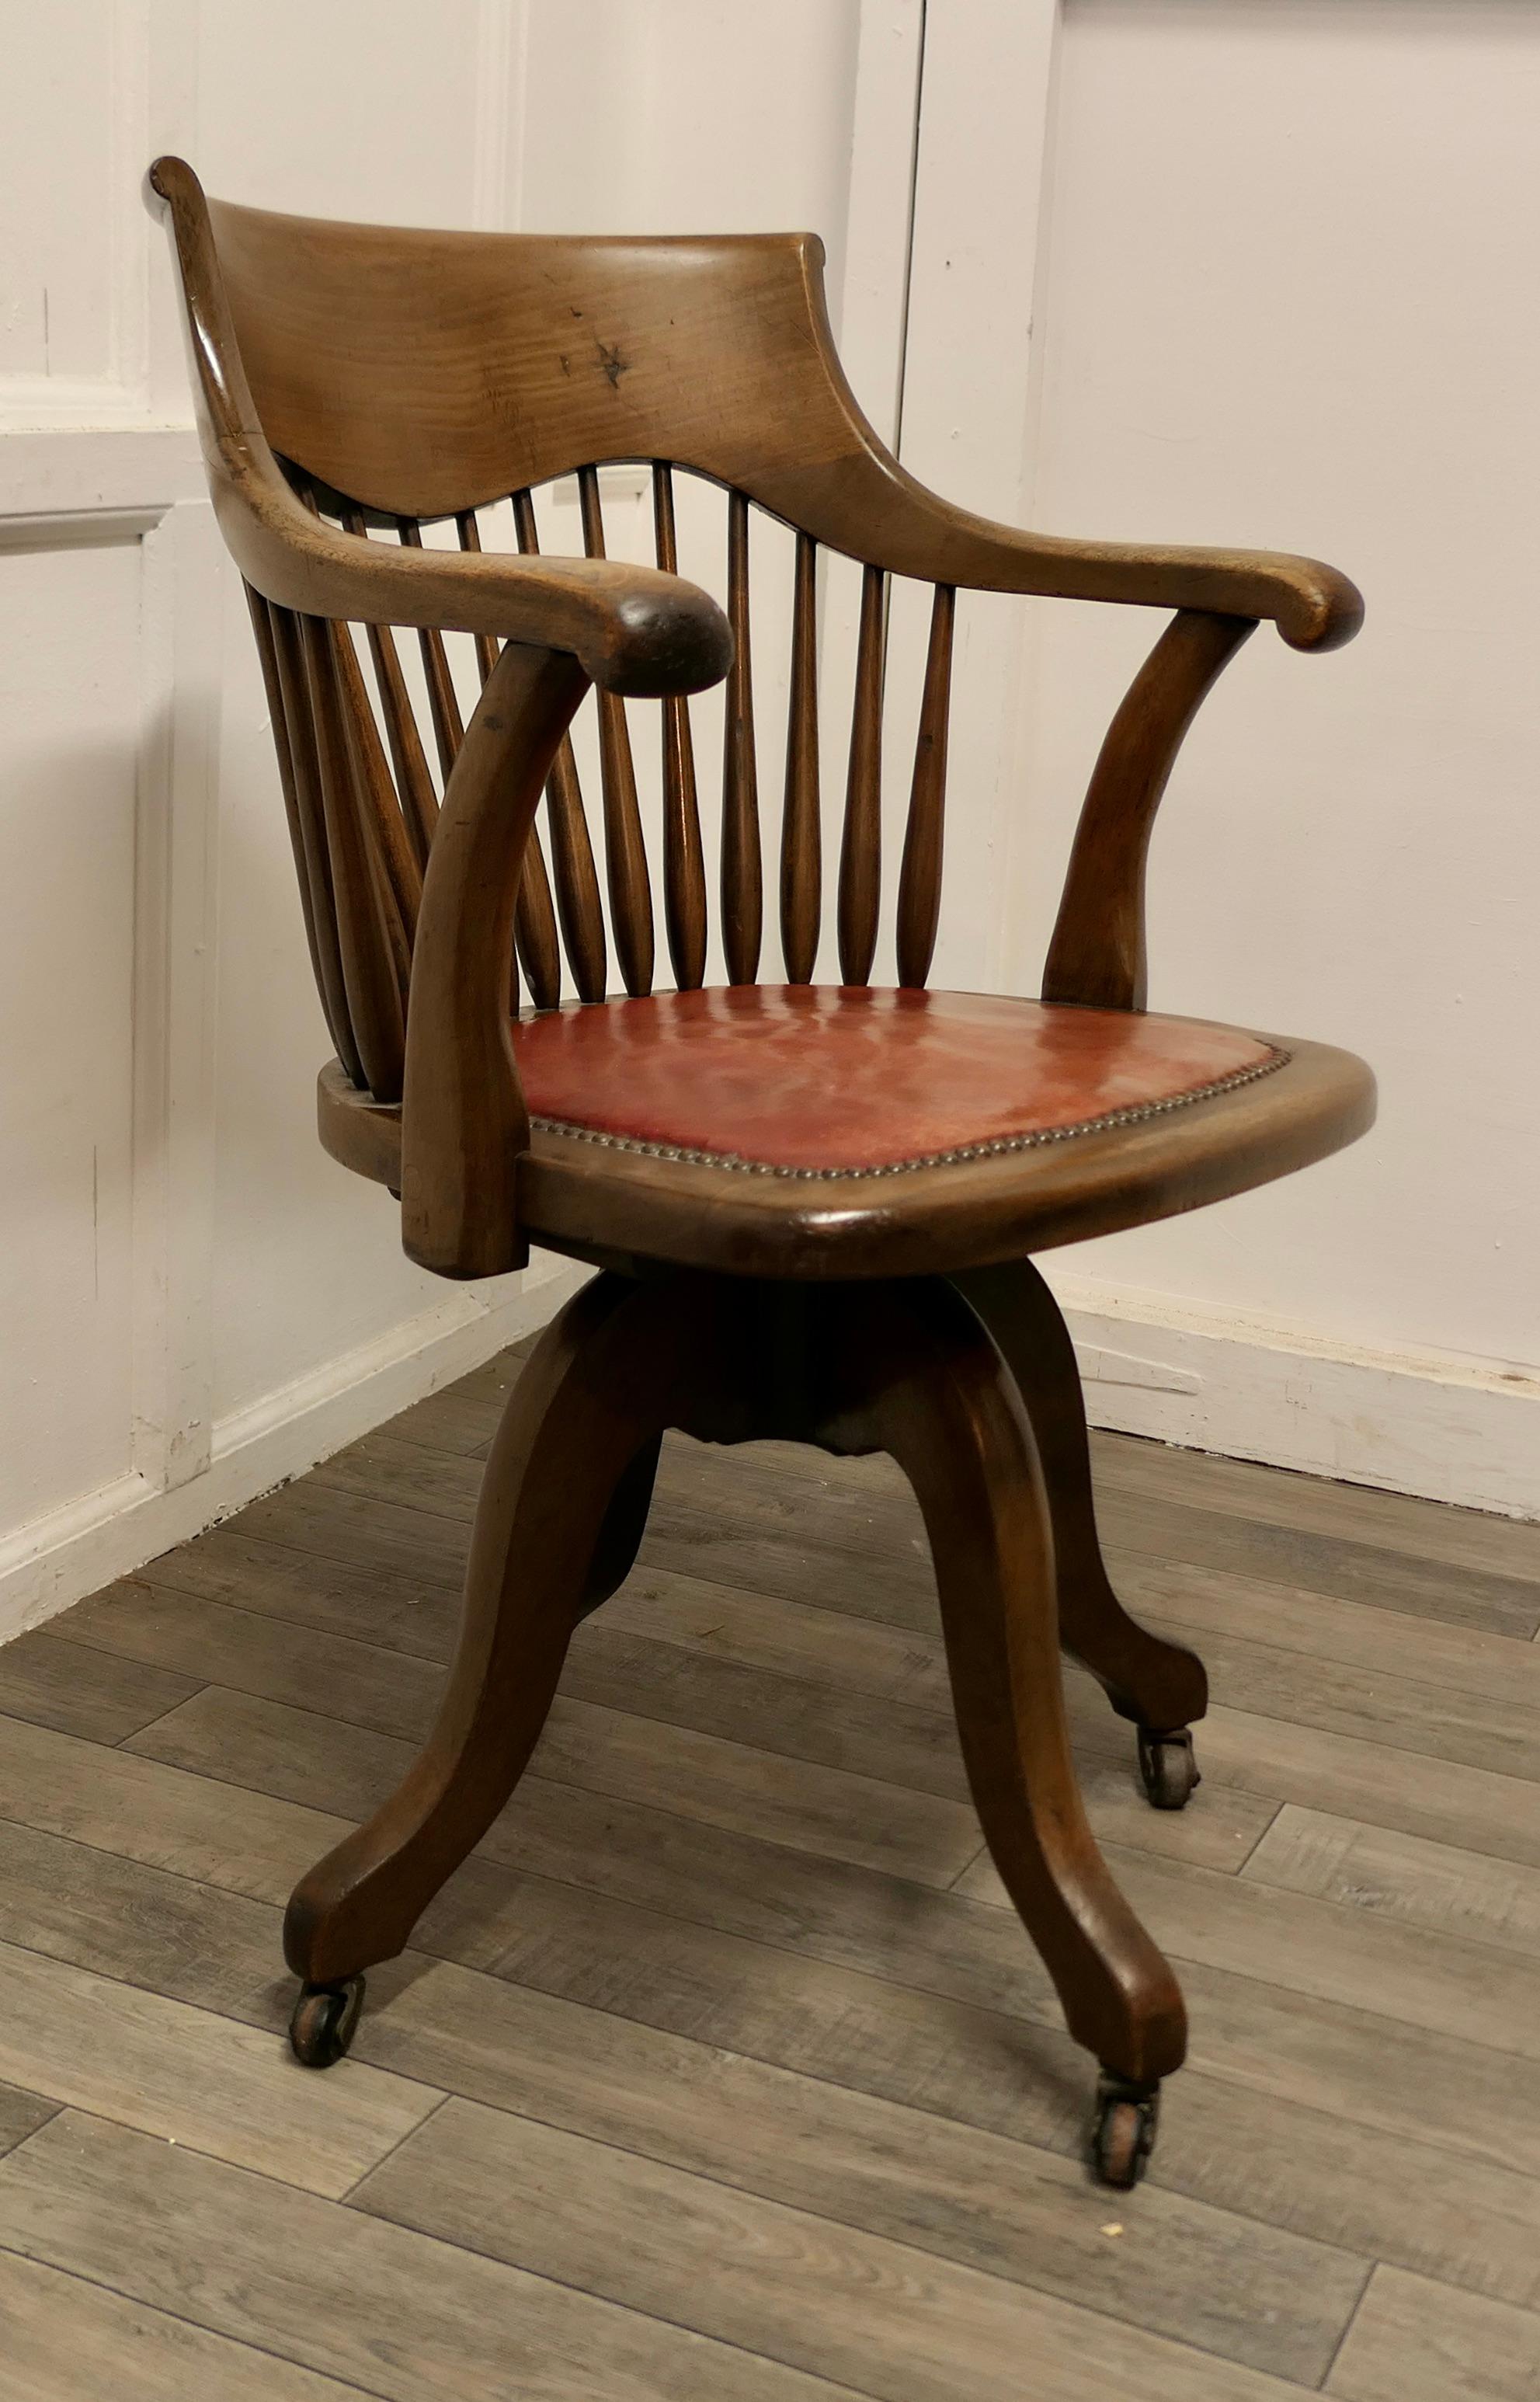 Arts and Crafts Desk or Office Chair by Kendrick & Jefferson

This Art Deco Walnut office chair has an attractive curving shaped back with a wide shaped top rail and comfortable arm rests, the seat is upholstered in red hide (which seems to be